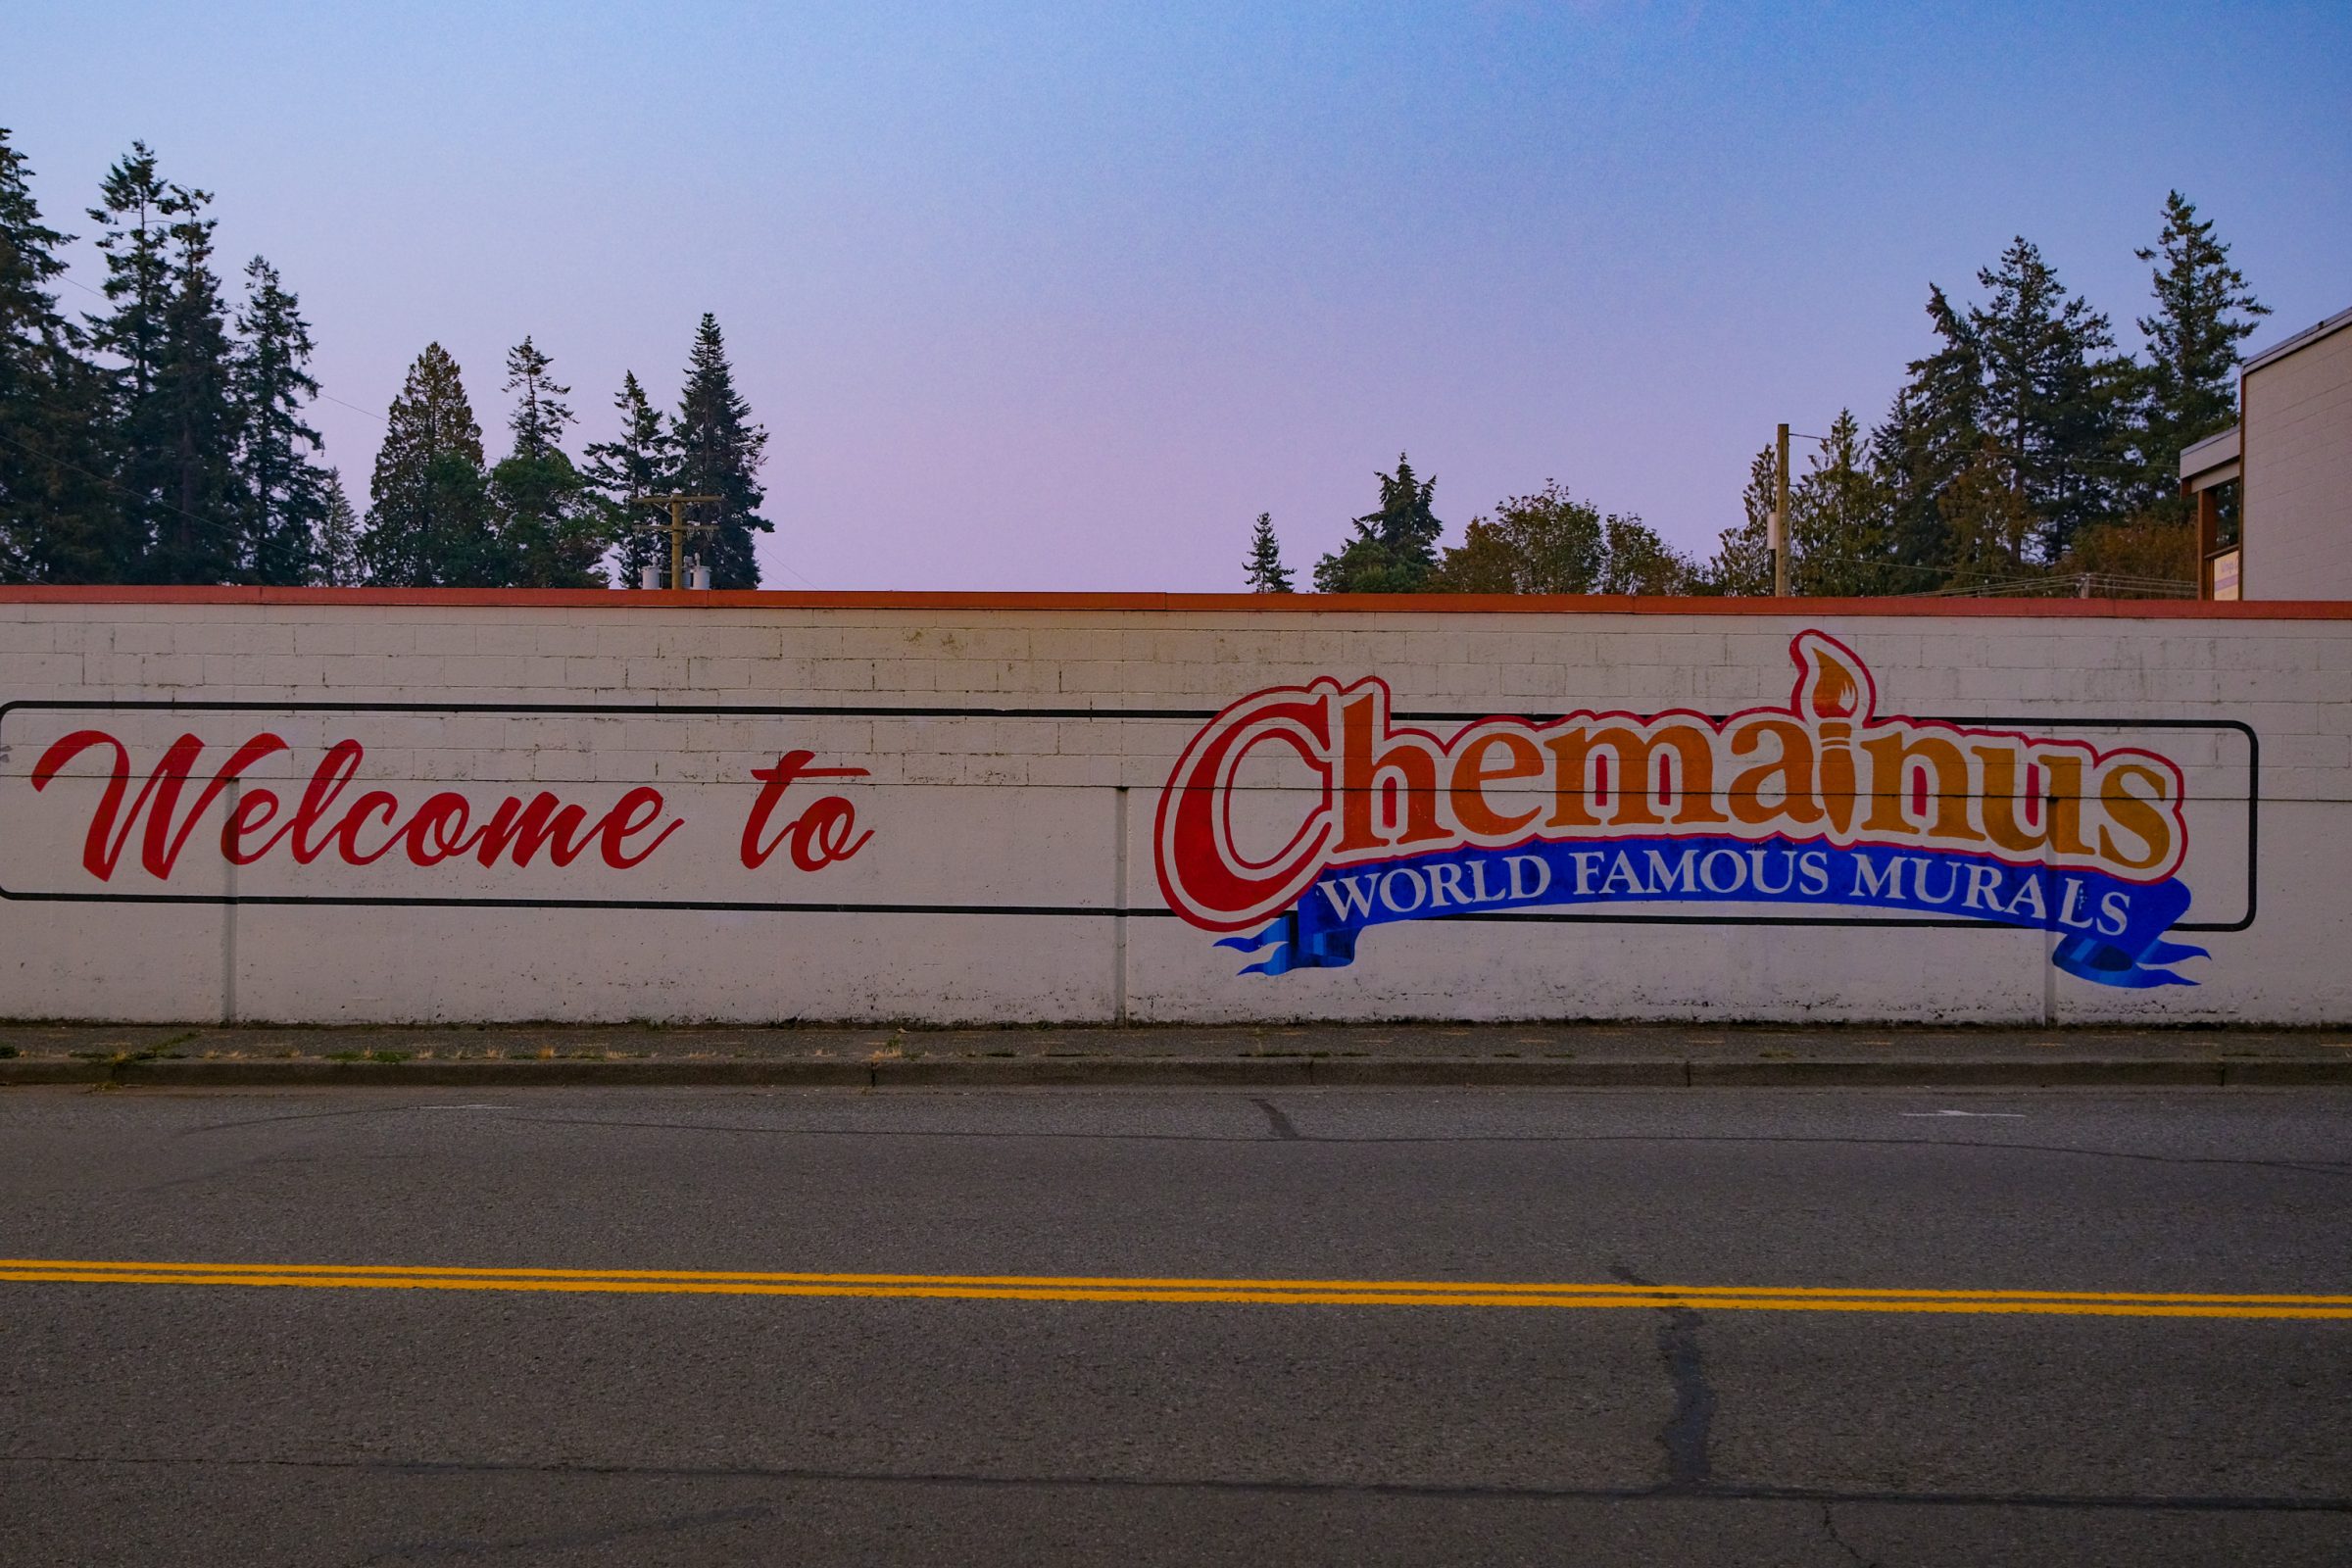 Welcome to Chemainus world famous murals